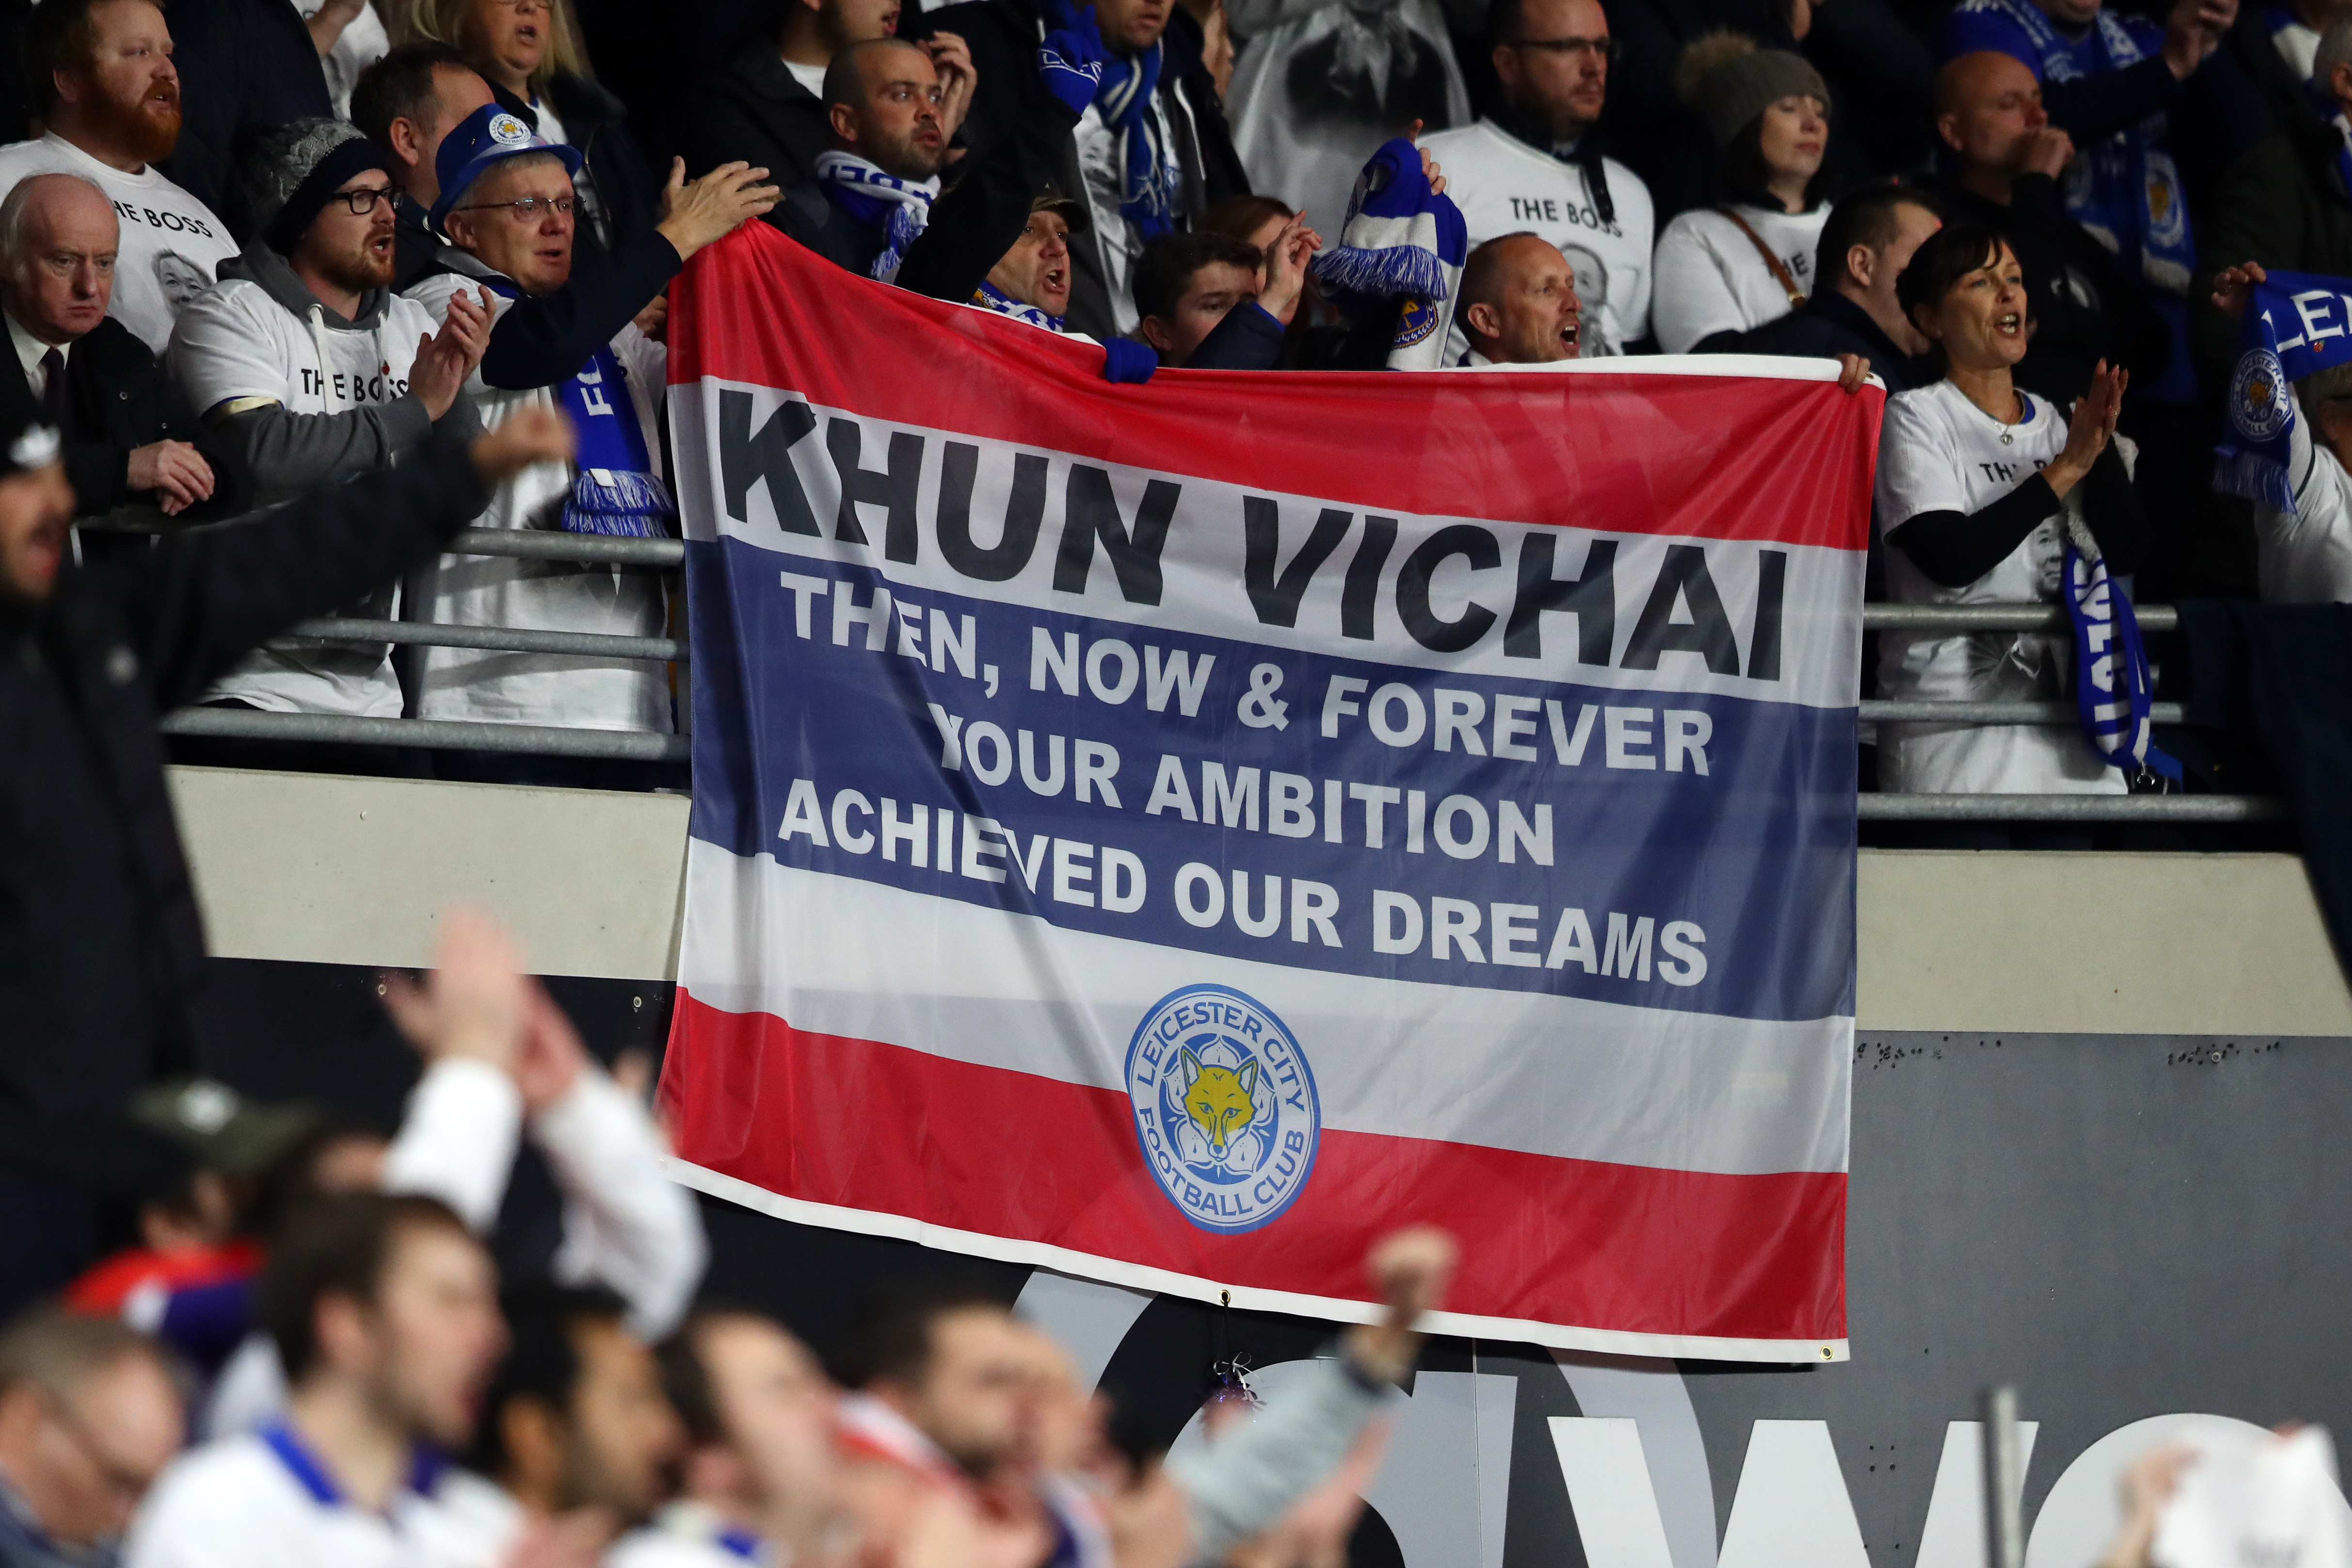 CARDIFF, WALES - NOVEMBER 03: Leicester City fans holds up a commemorative banner for Vichai Srivaddhanaprabha after the Premier League match between Cardiff City and Leicester City at Cardiff City Stadium on November 3, 2018 in Cardiff, United Kingdom.  (Photo by Michael Steele/Getty Images)